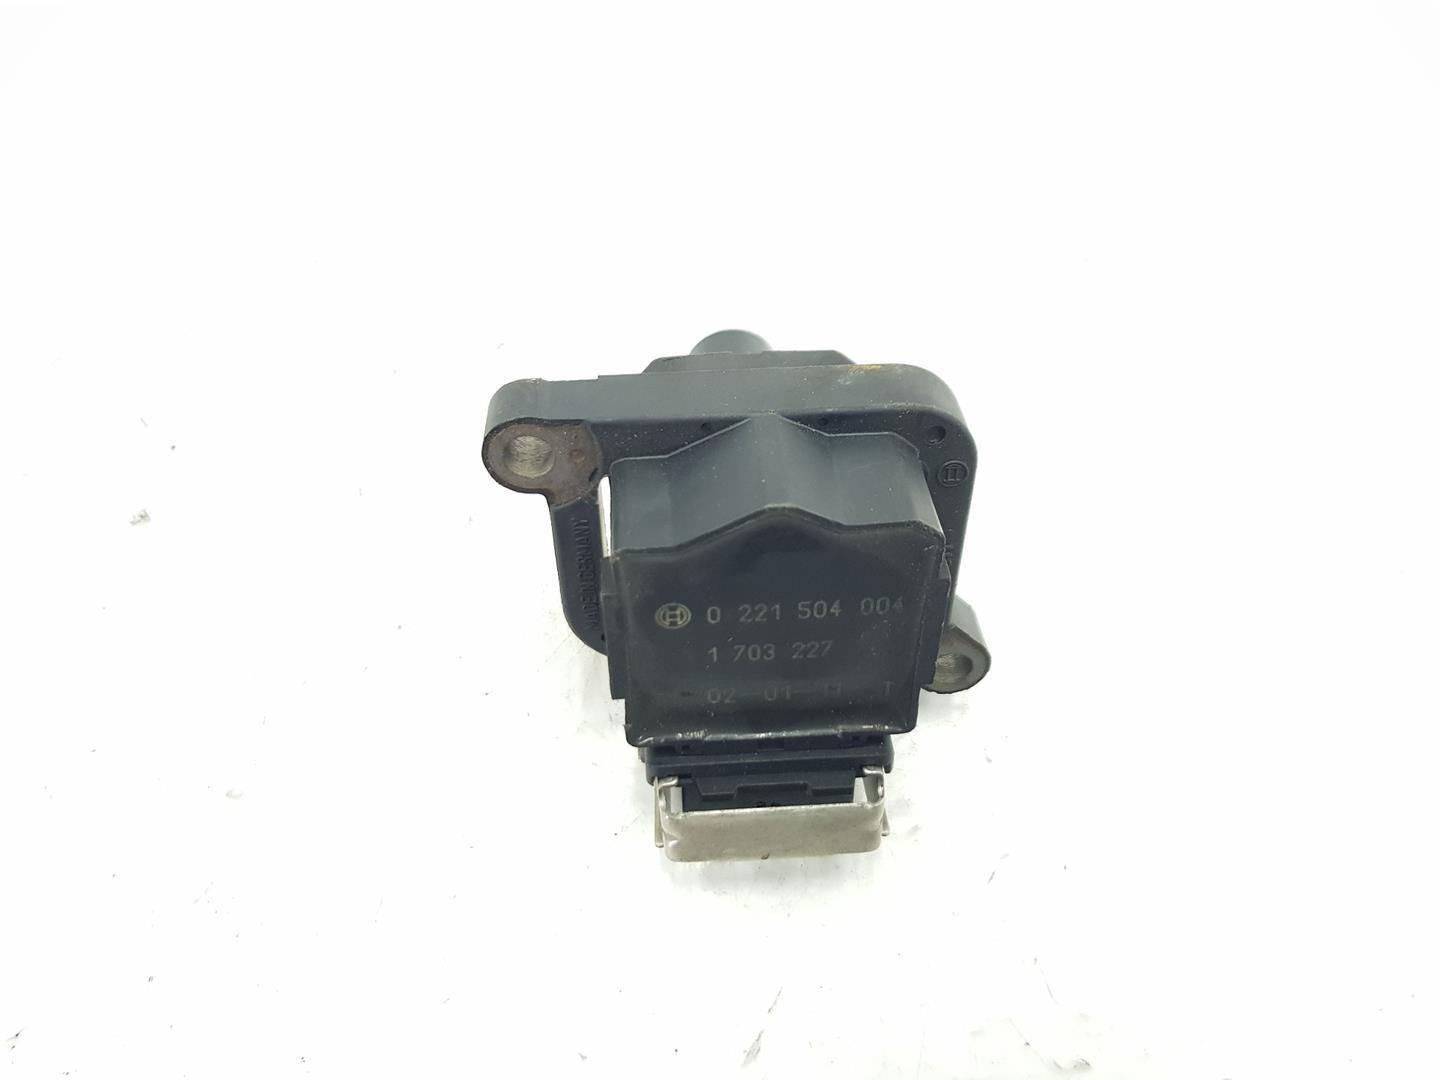 BMW 5 Series E39 (1995-2004) High Voltage Ignition Coil 12131740477, 1703227, 0221504004 19812264